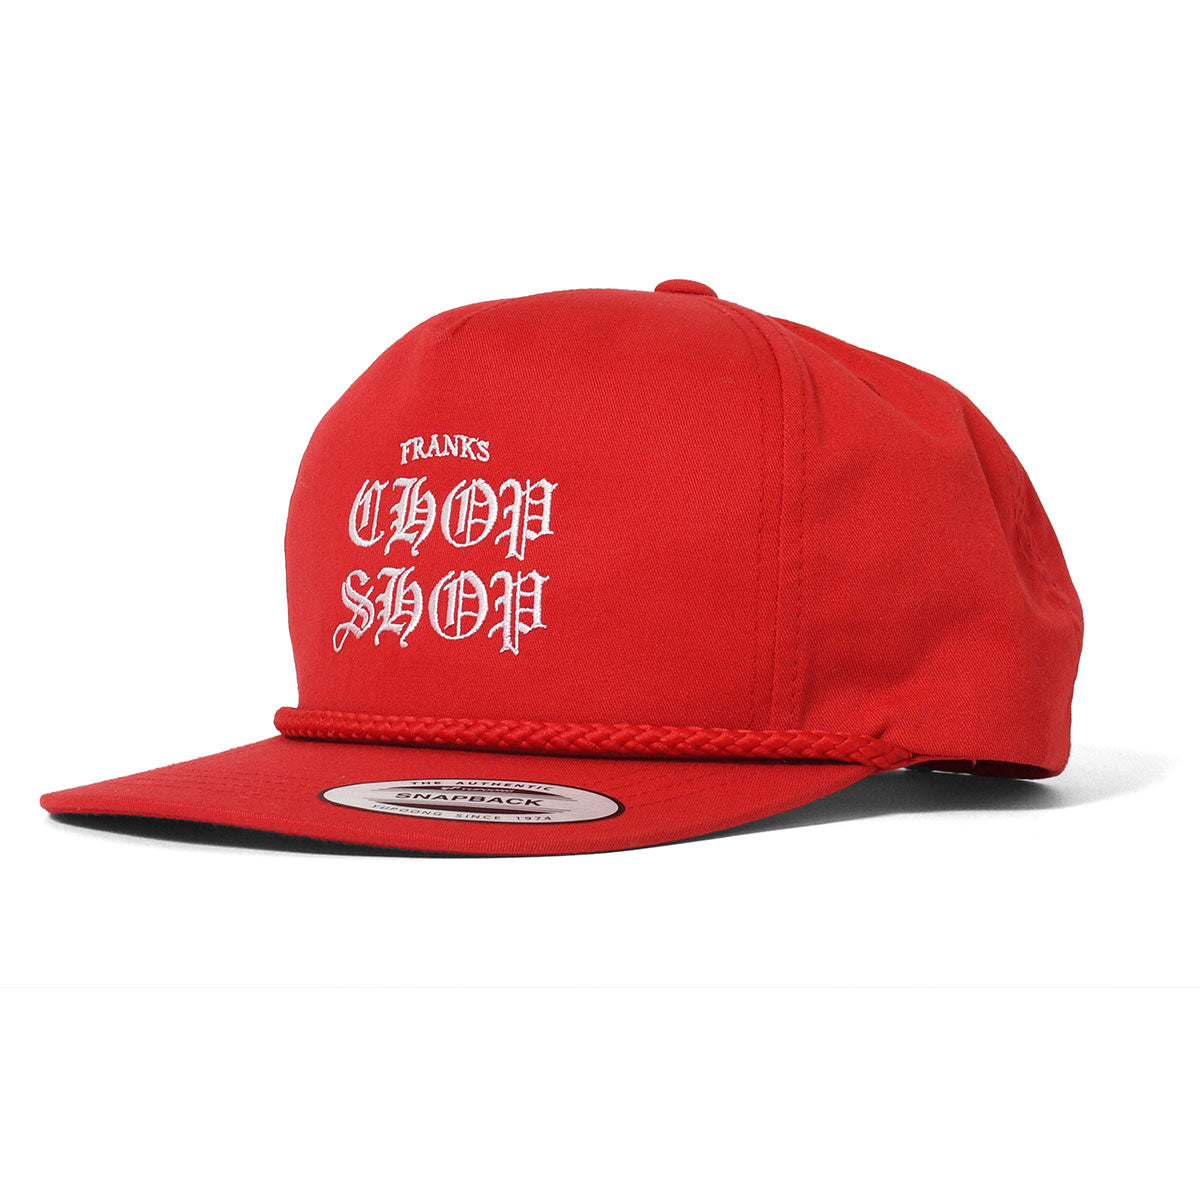 FRANK'S CHOP SHOP OLD ENGLISH LOGO TRUCK CAP (RED)